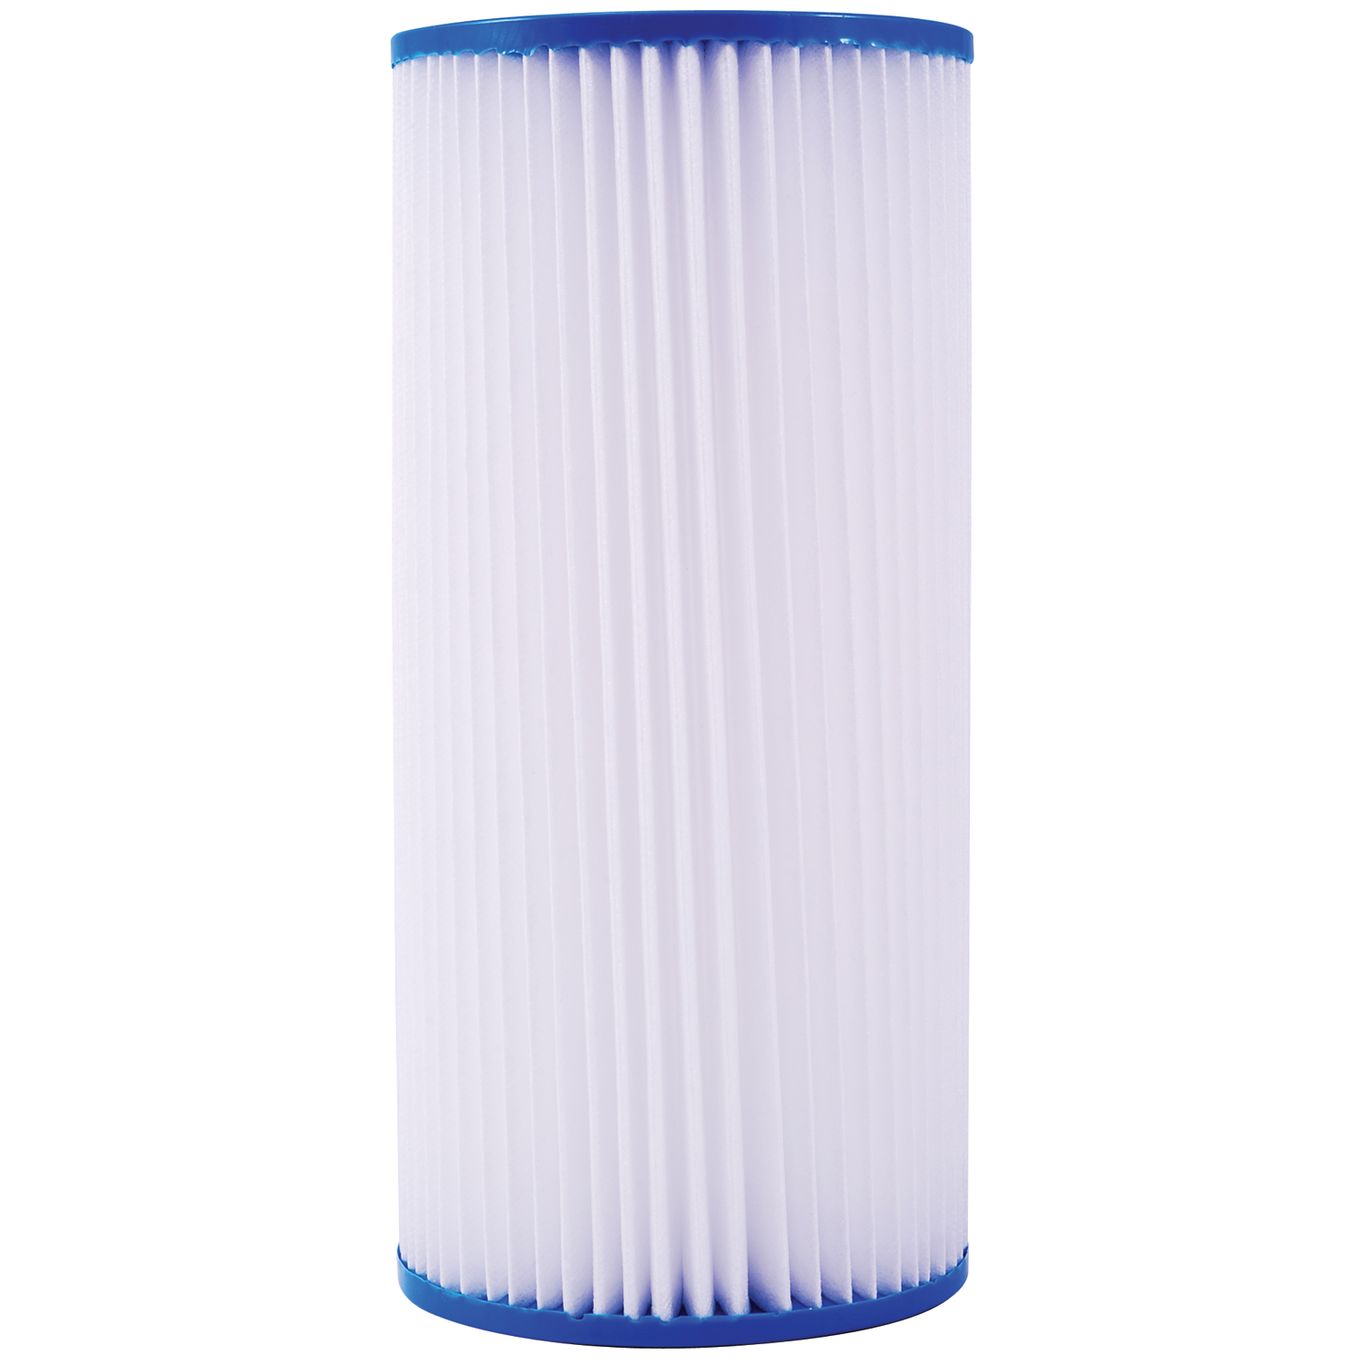 7100416 - 20 x 4-1/2 in. Pleated Filter Cartridge